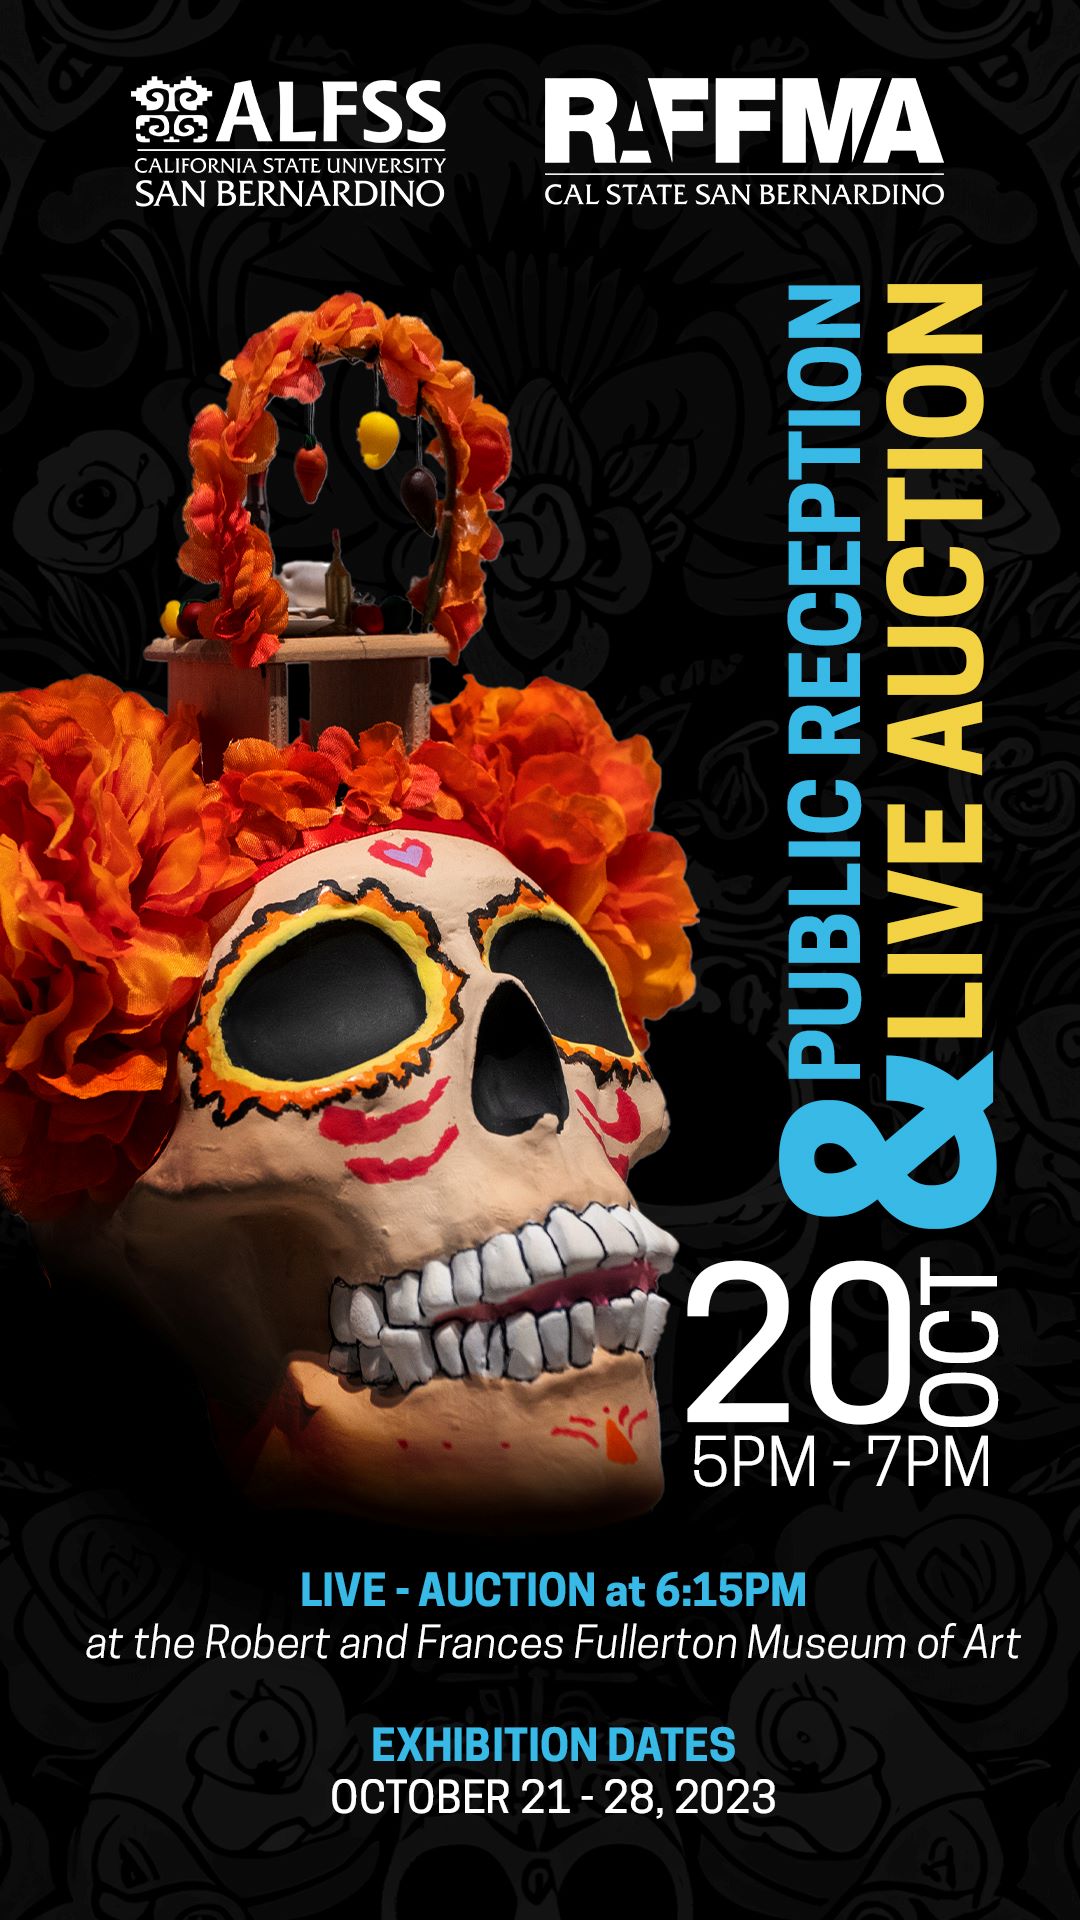 Flyer with a black background, hand painted and decorated skull with event details